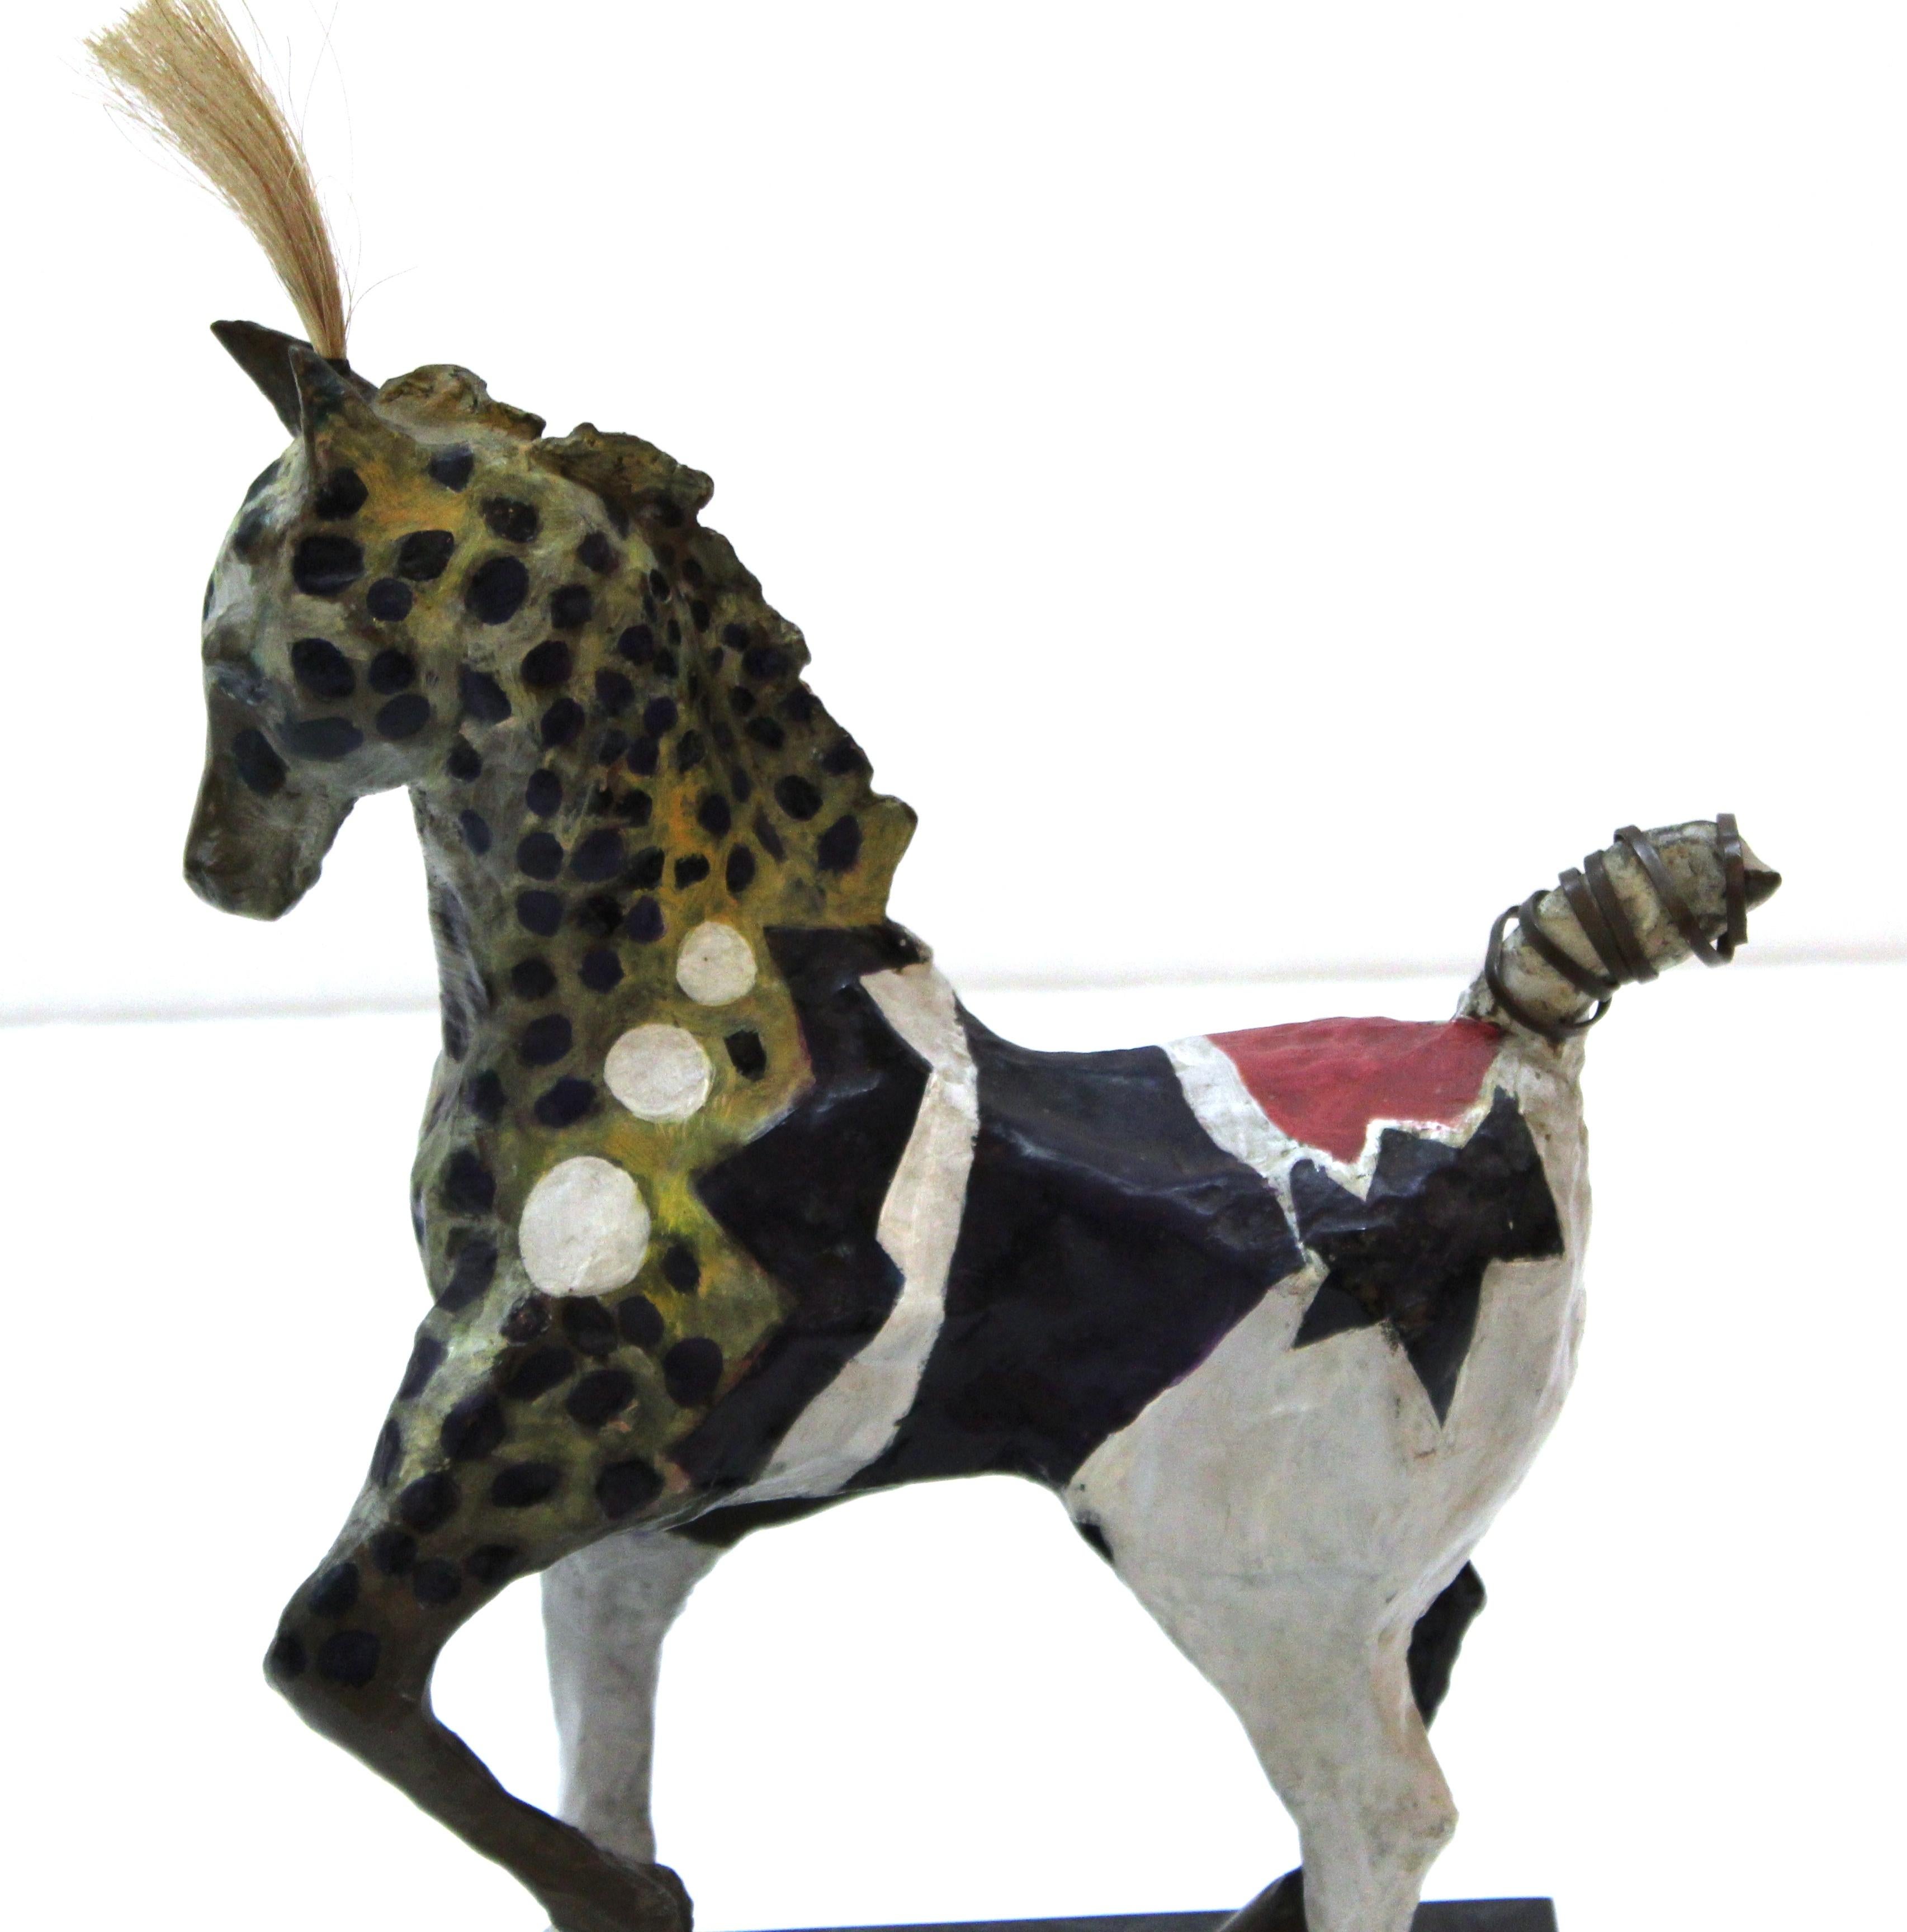 Modern painted bronze horse sculpture made by Susan Rowland (American, b. 1940). The horse has horsetail hair on its head and metal added to its tail (likely originally also holding horsehair) and colorful cold-painted finish. Signed on the bottom